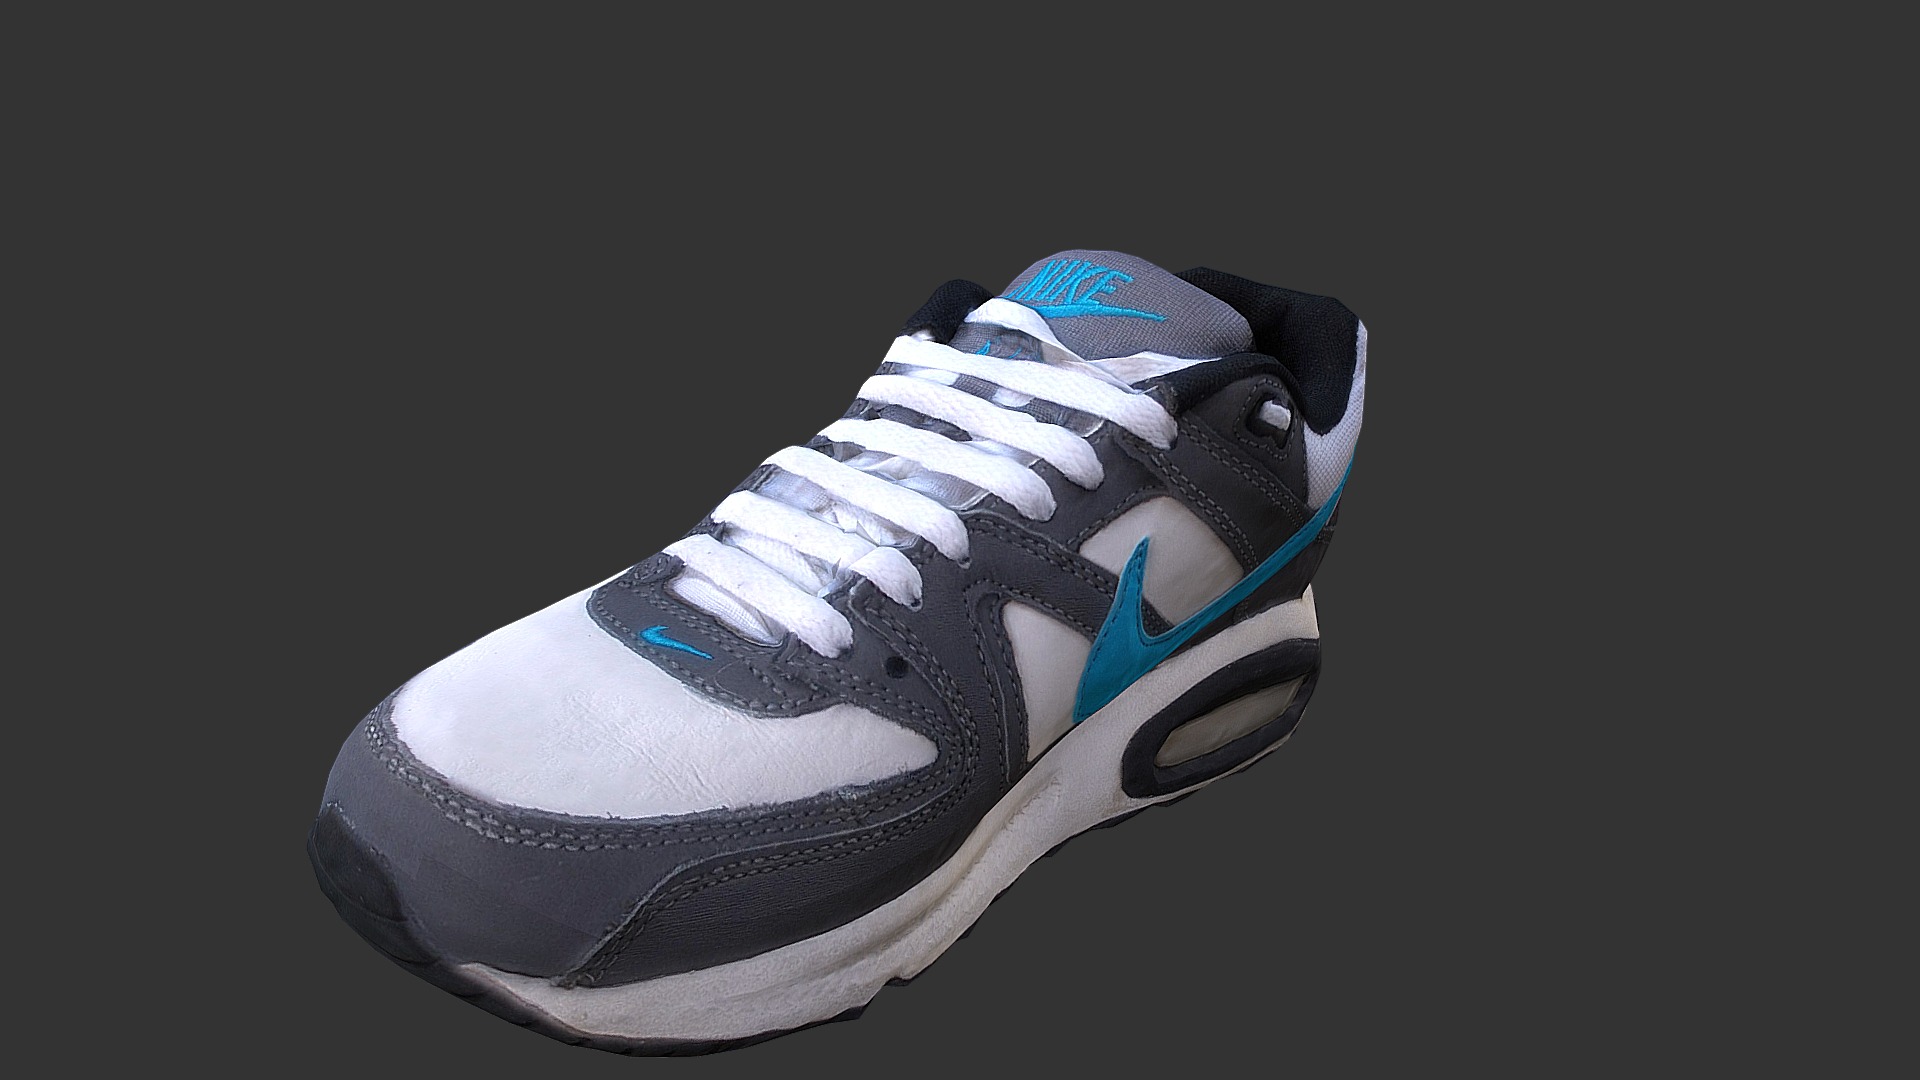 3D model Sneaker low poly 3D model - This is a 3D model of the Sneaker low poly 3D model. The 3D model is about a black and white shoe.